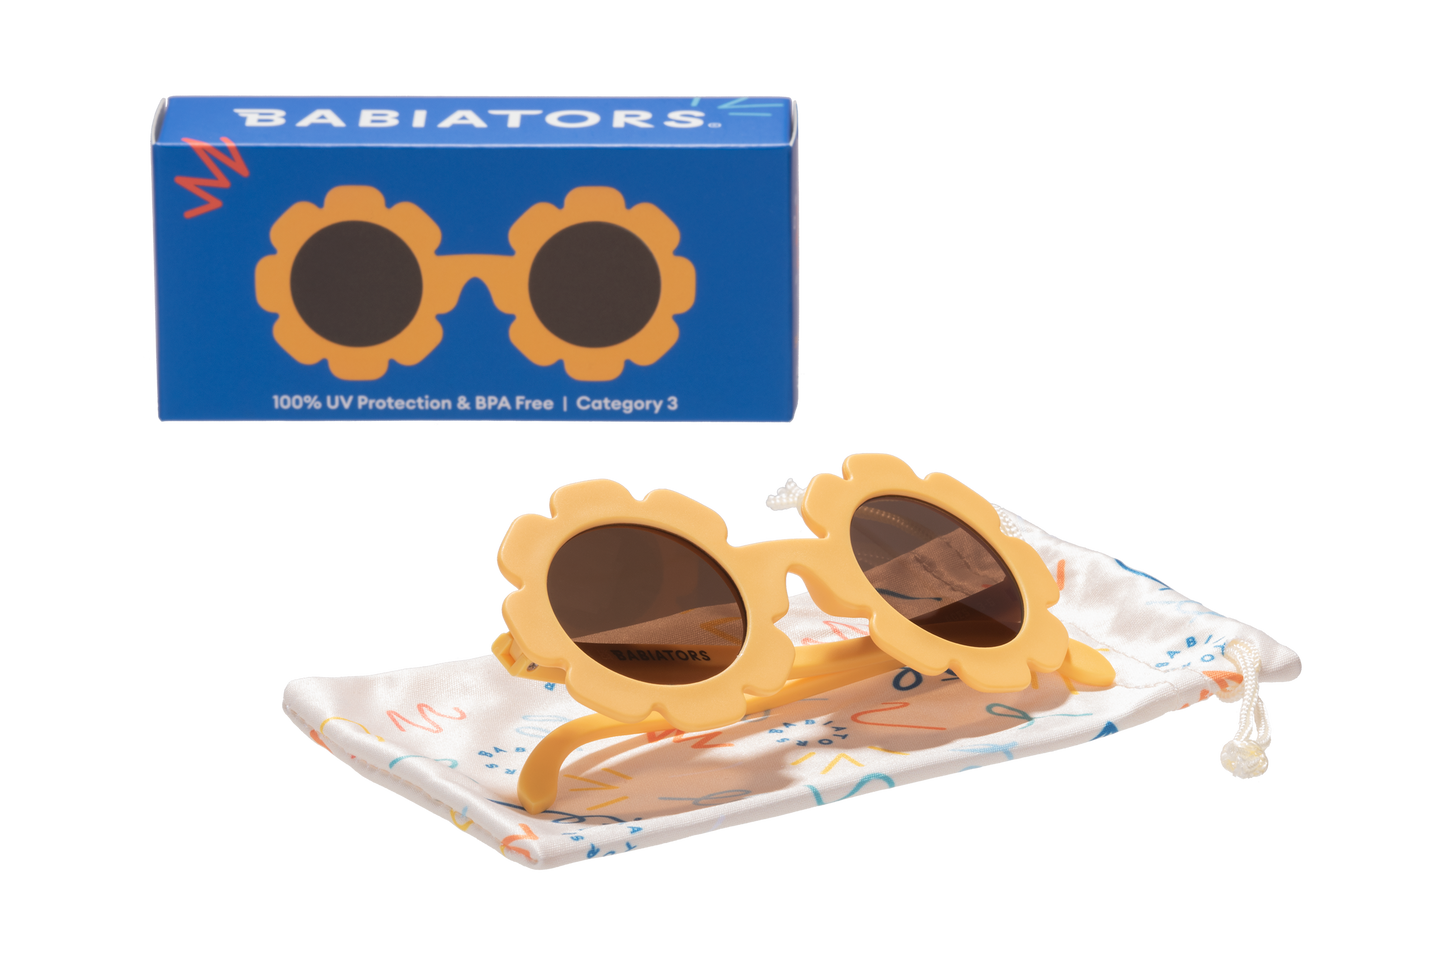 Limited Edition flowers mirrored Sunglasses: " Sweet Sunflower"